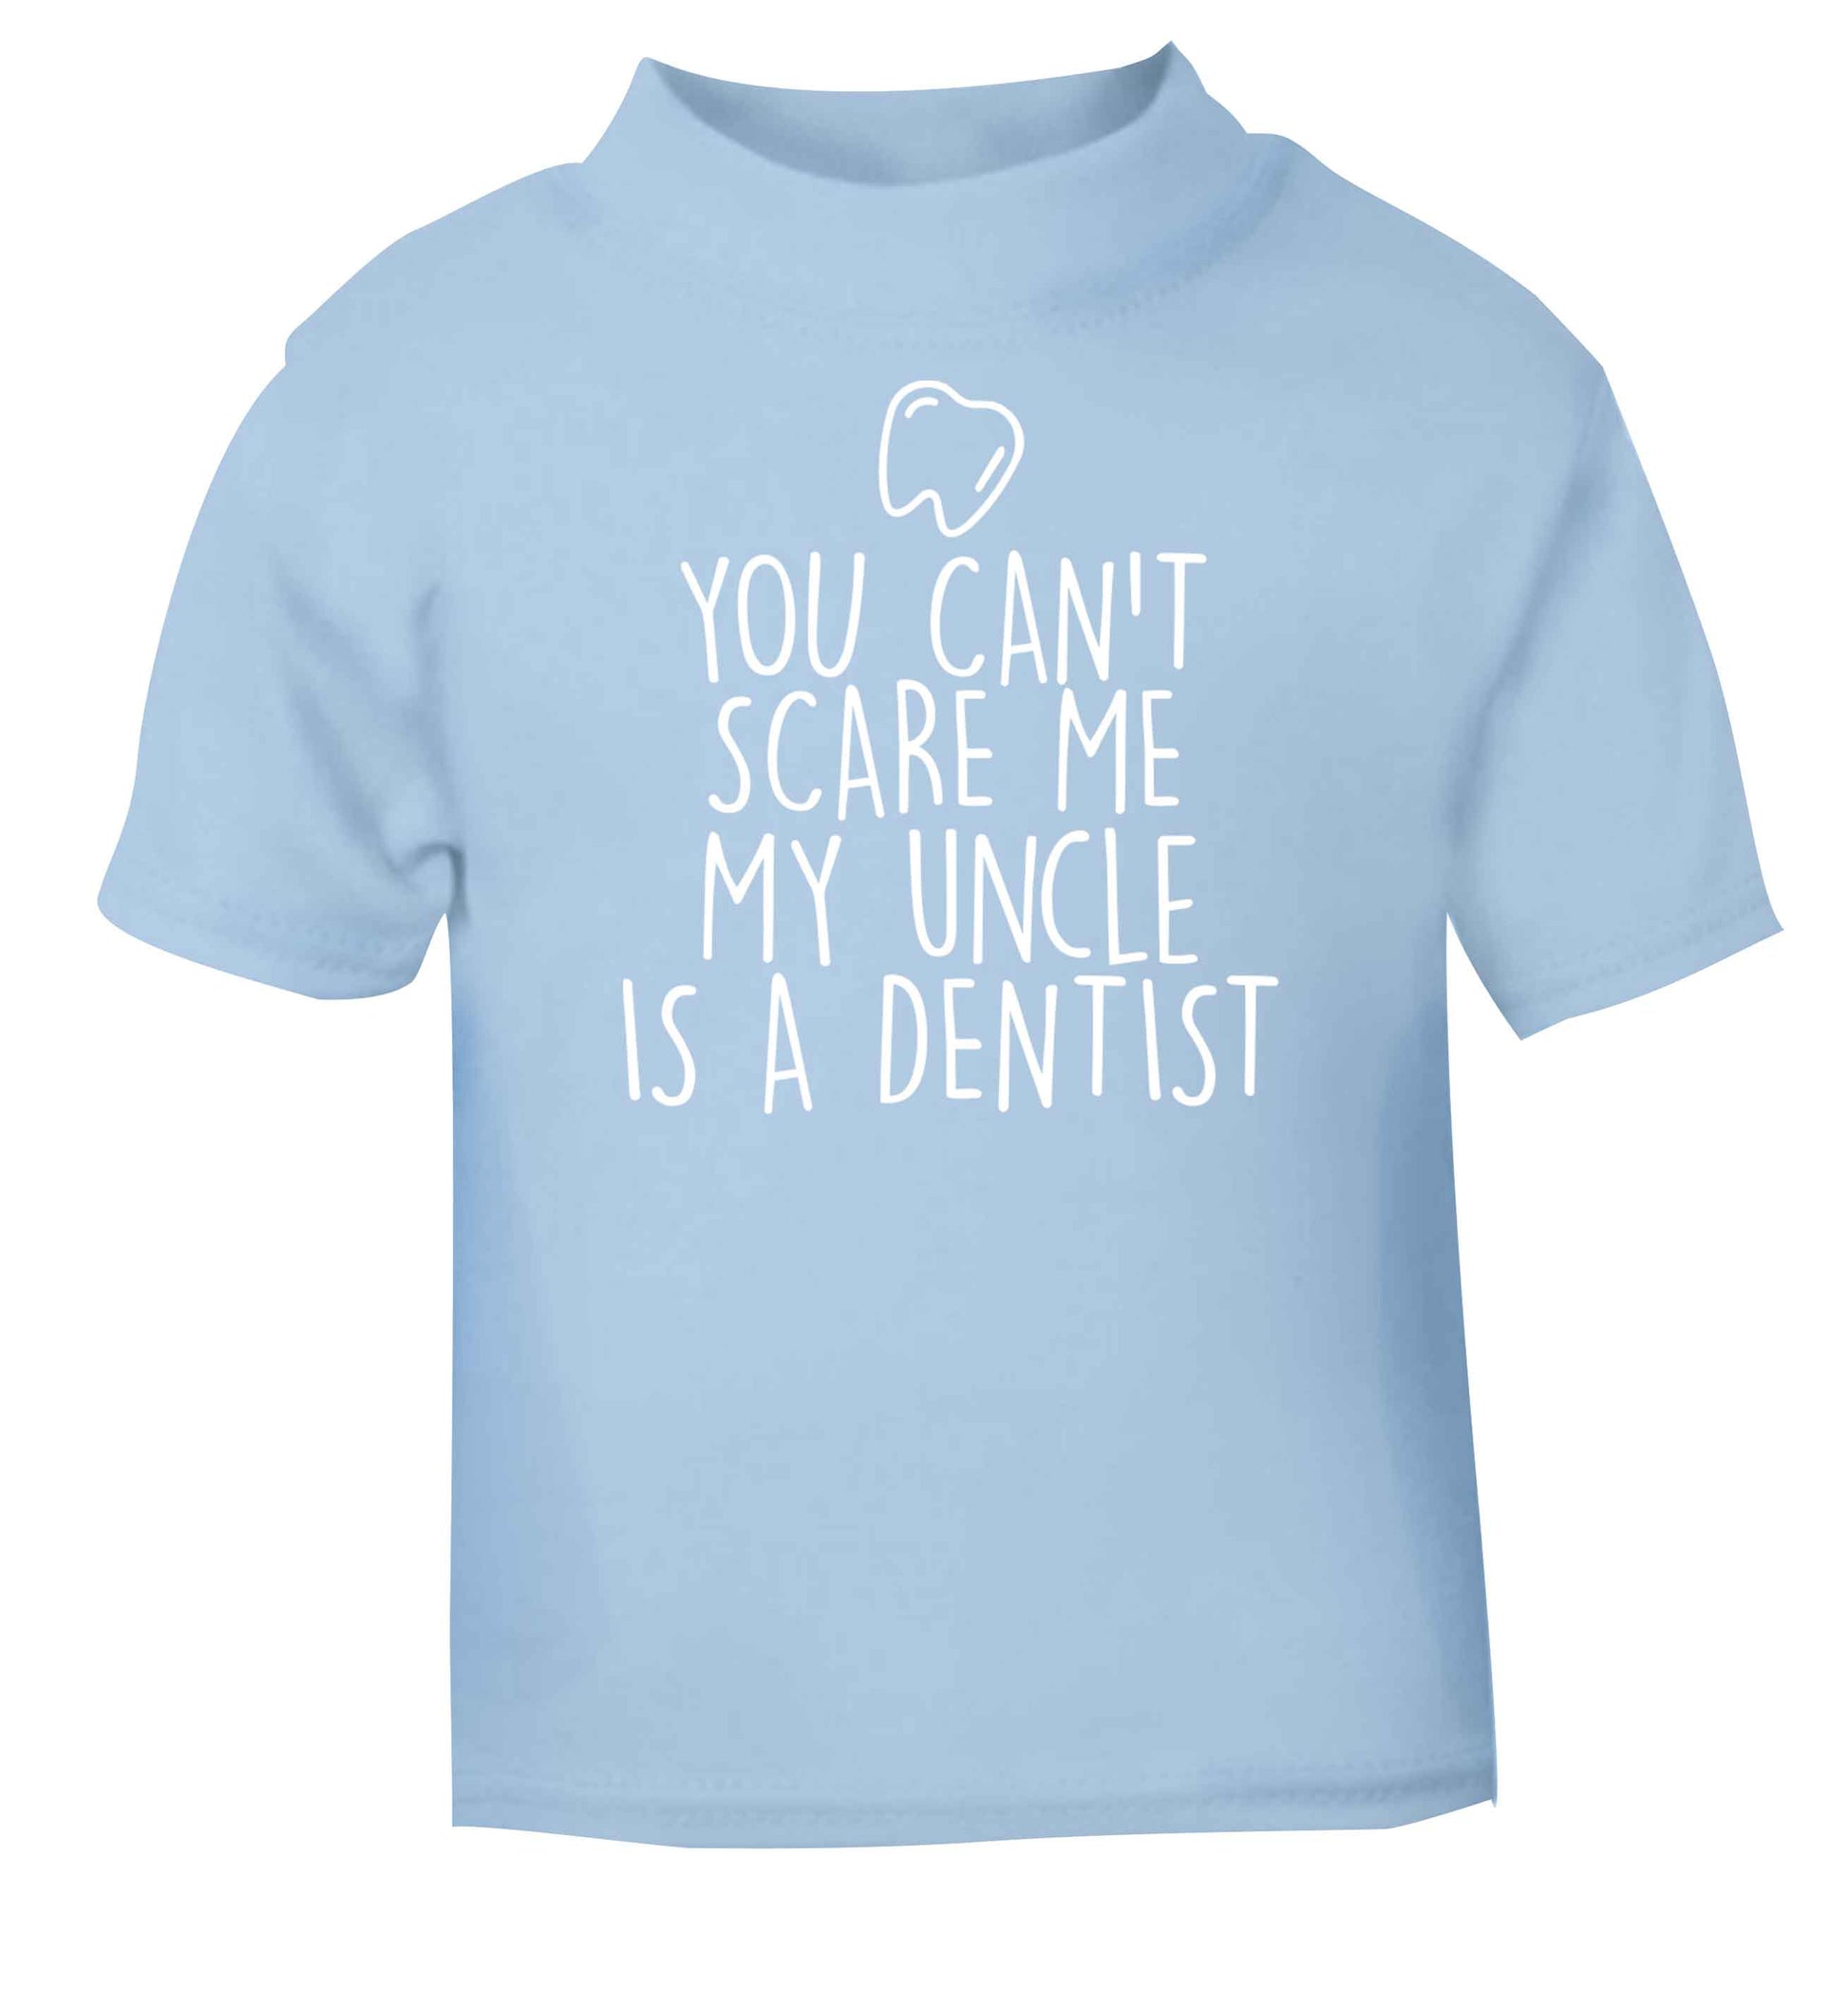 You can't scare me my uncle is a dentist light blue baby toddler Tshirt 2 Years